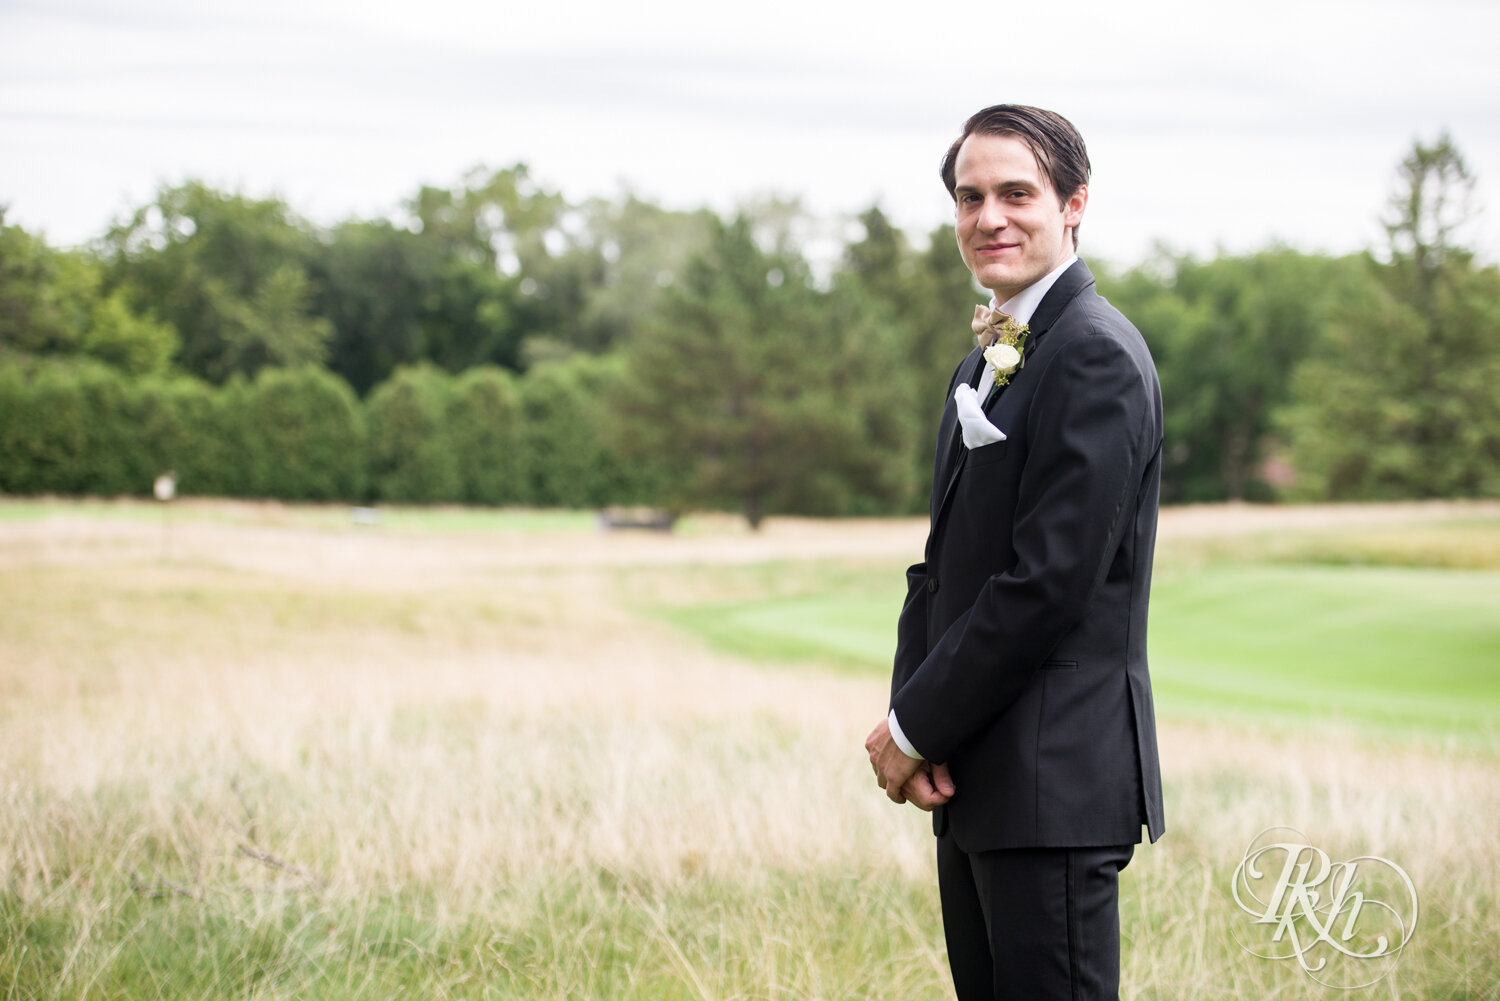 Bride and groom share first look at Olympic Hills Golf Club in Eden Prairie, Minnesota.